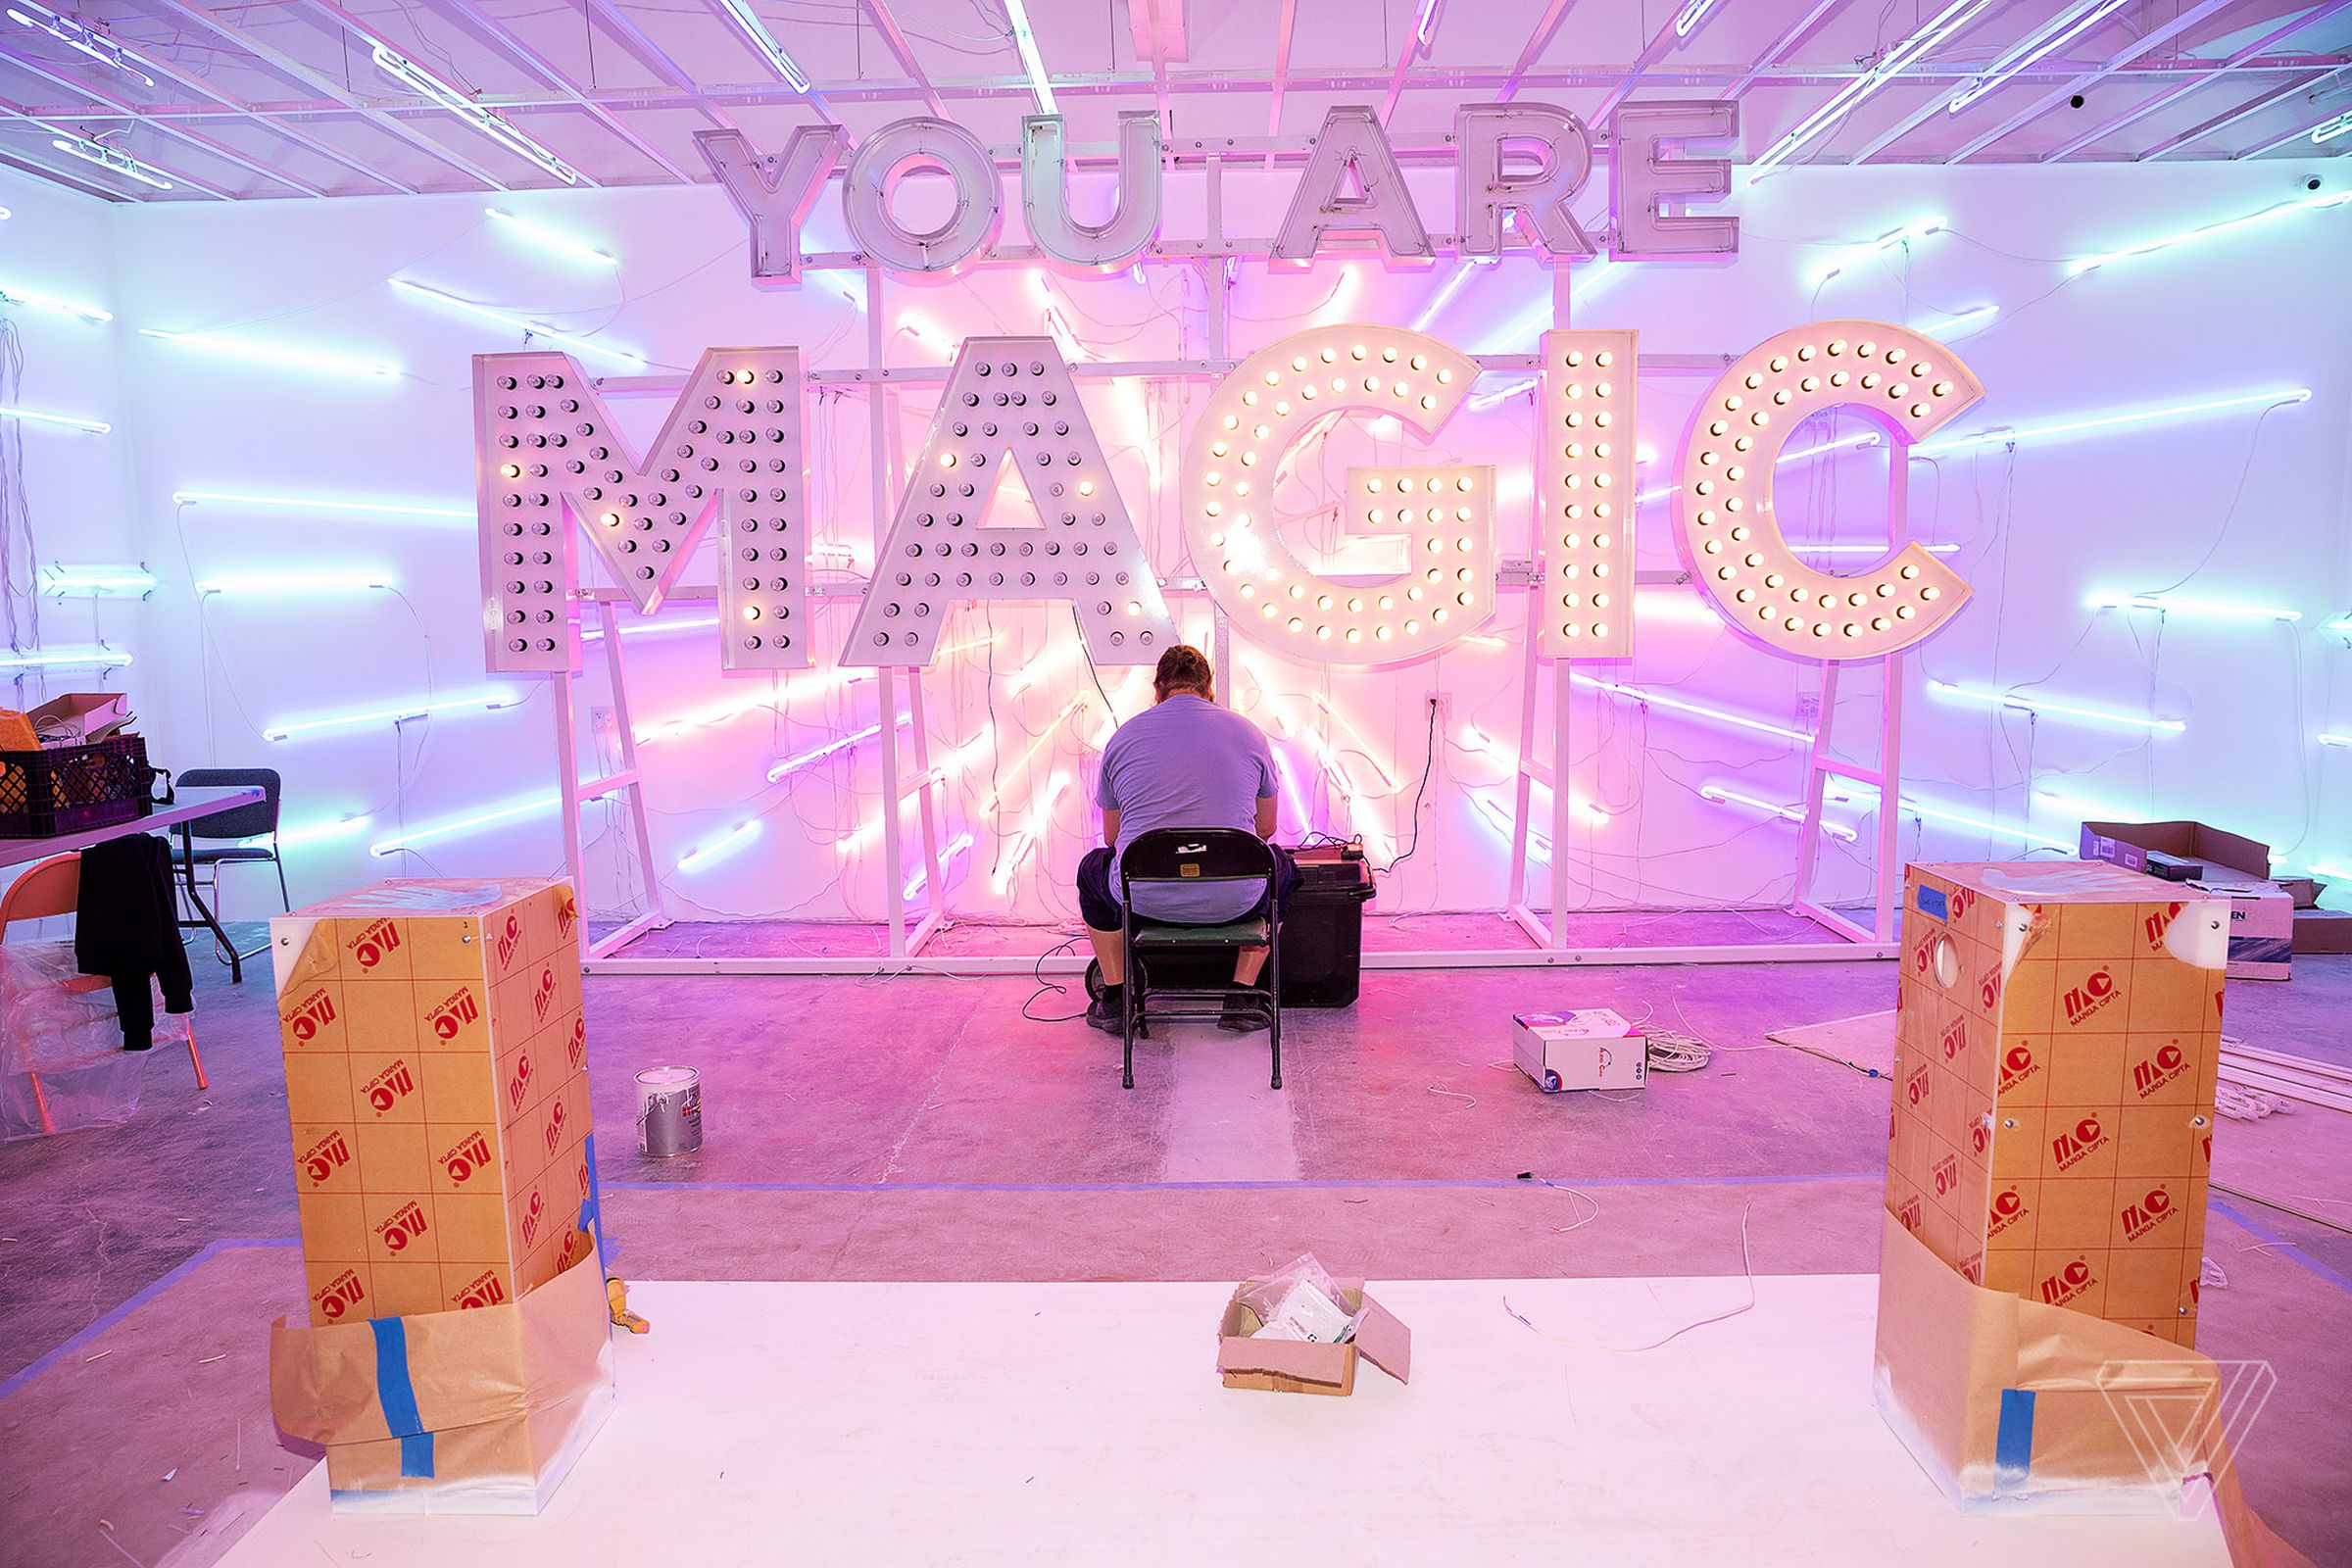 Installation in progress of “Your Magic is Real” by Alicia Eggert & James Akers.